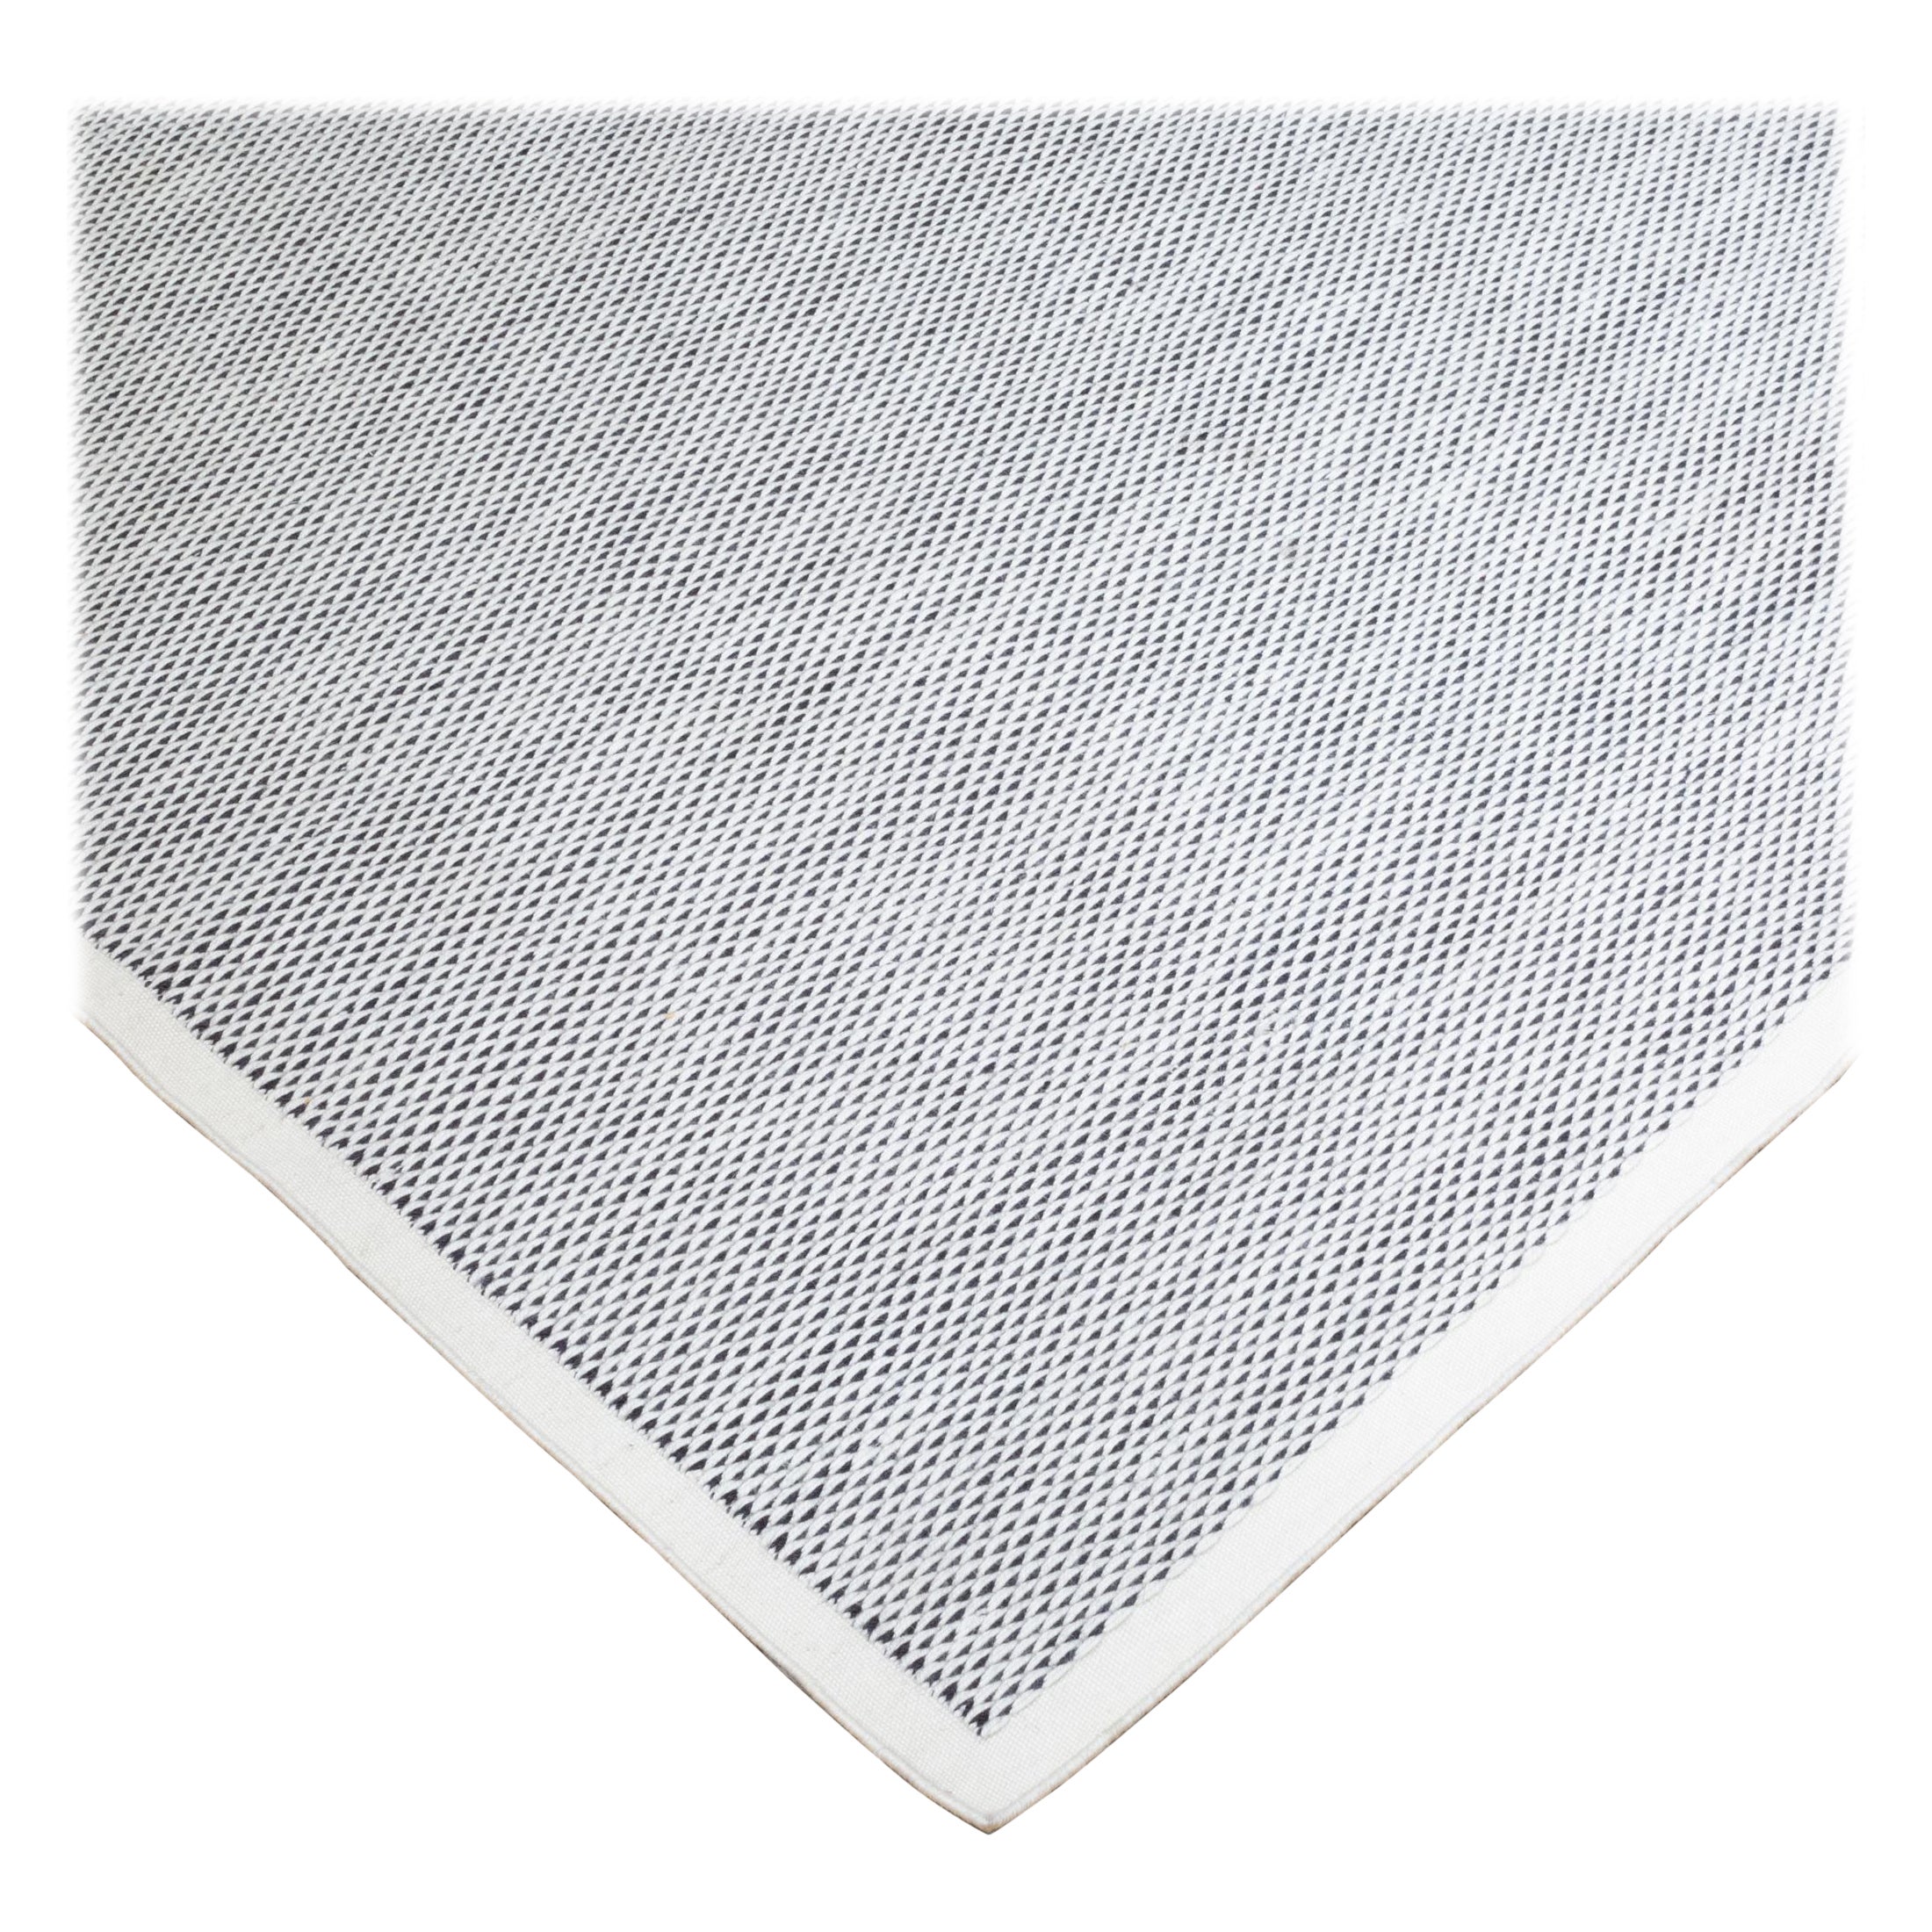 100% Merino Wool Lyxx Area Rug by Fells Andes 5' x 7' (FREE SHIPPING) For Sale